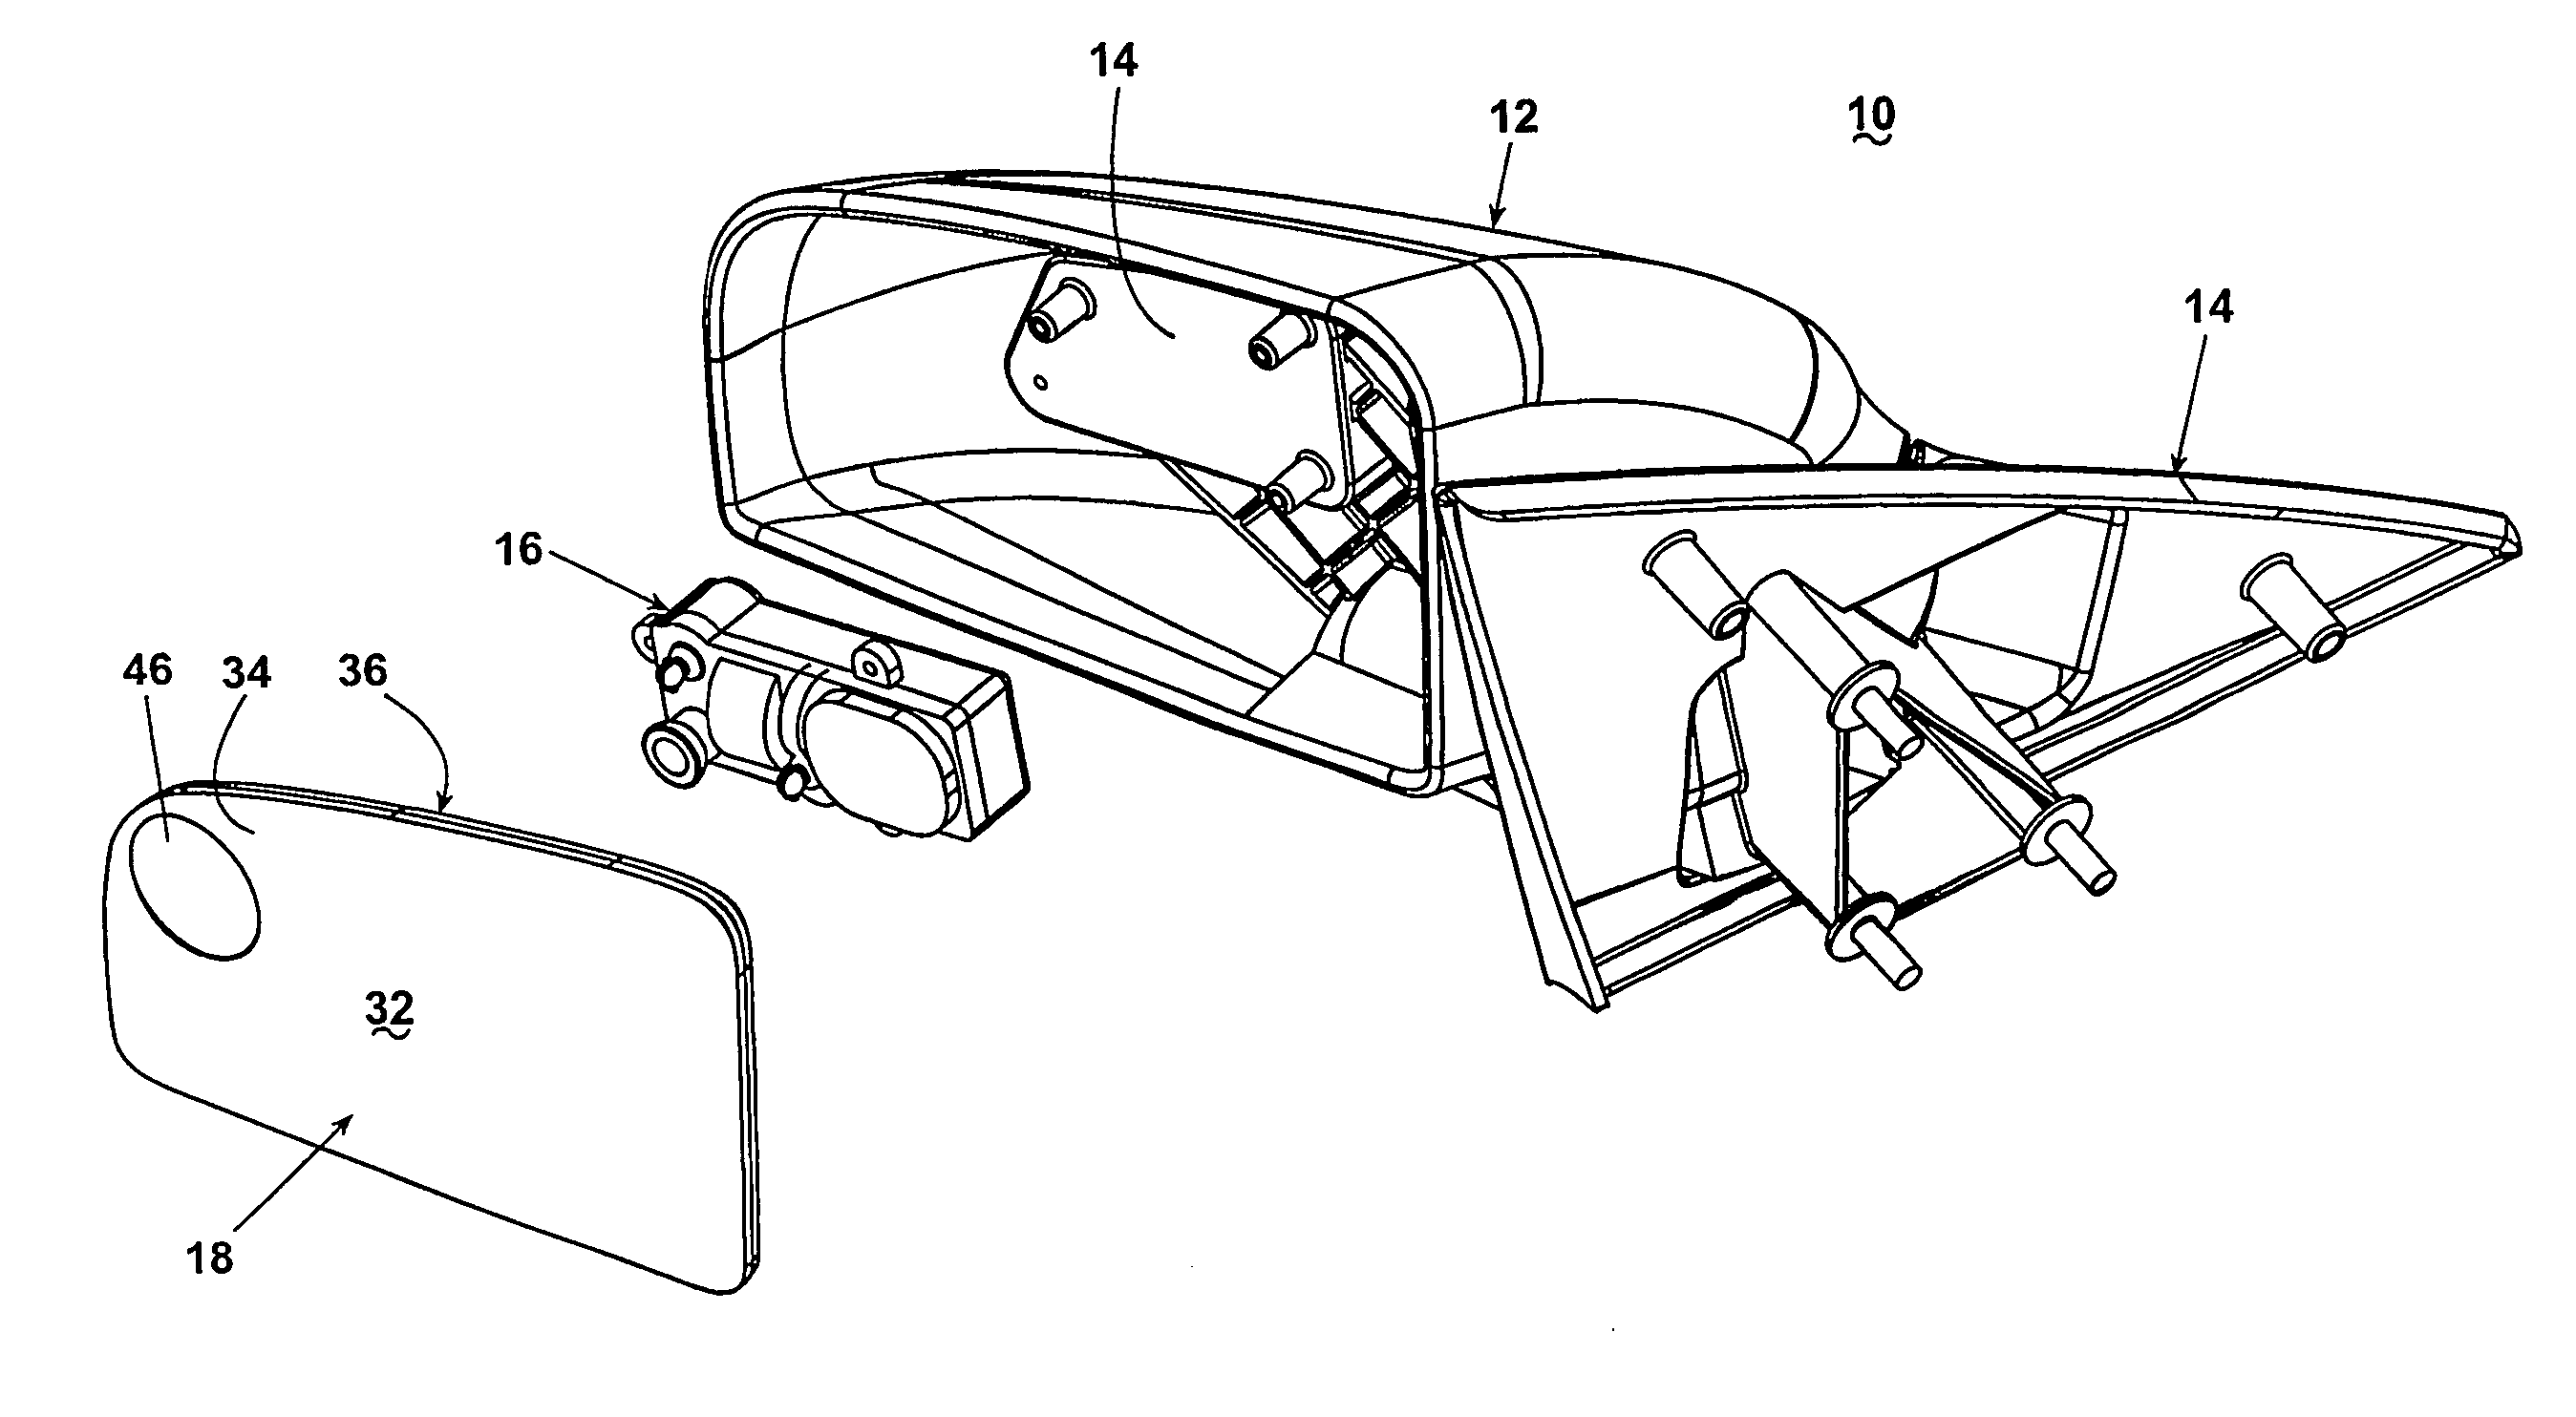 Vehicle mirror having polymeric reflective film element and self-dimming element